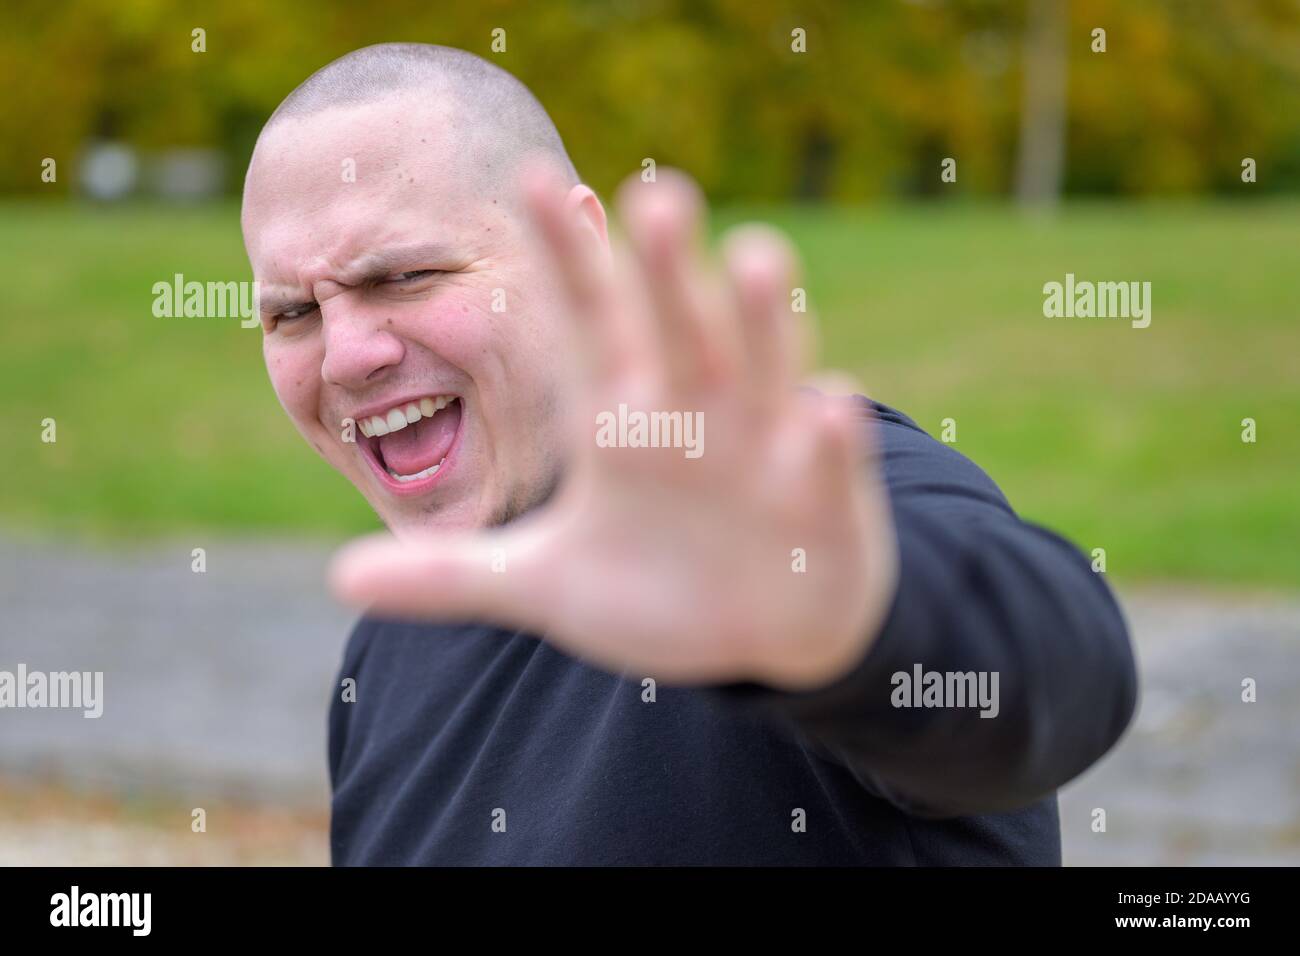 Angry young man shouting and gesturing with his hand with focus to his face outdoors in a park Stock Photo